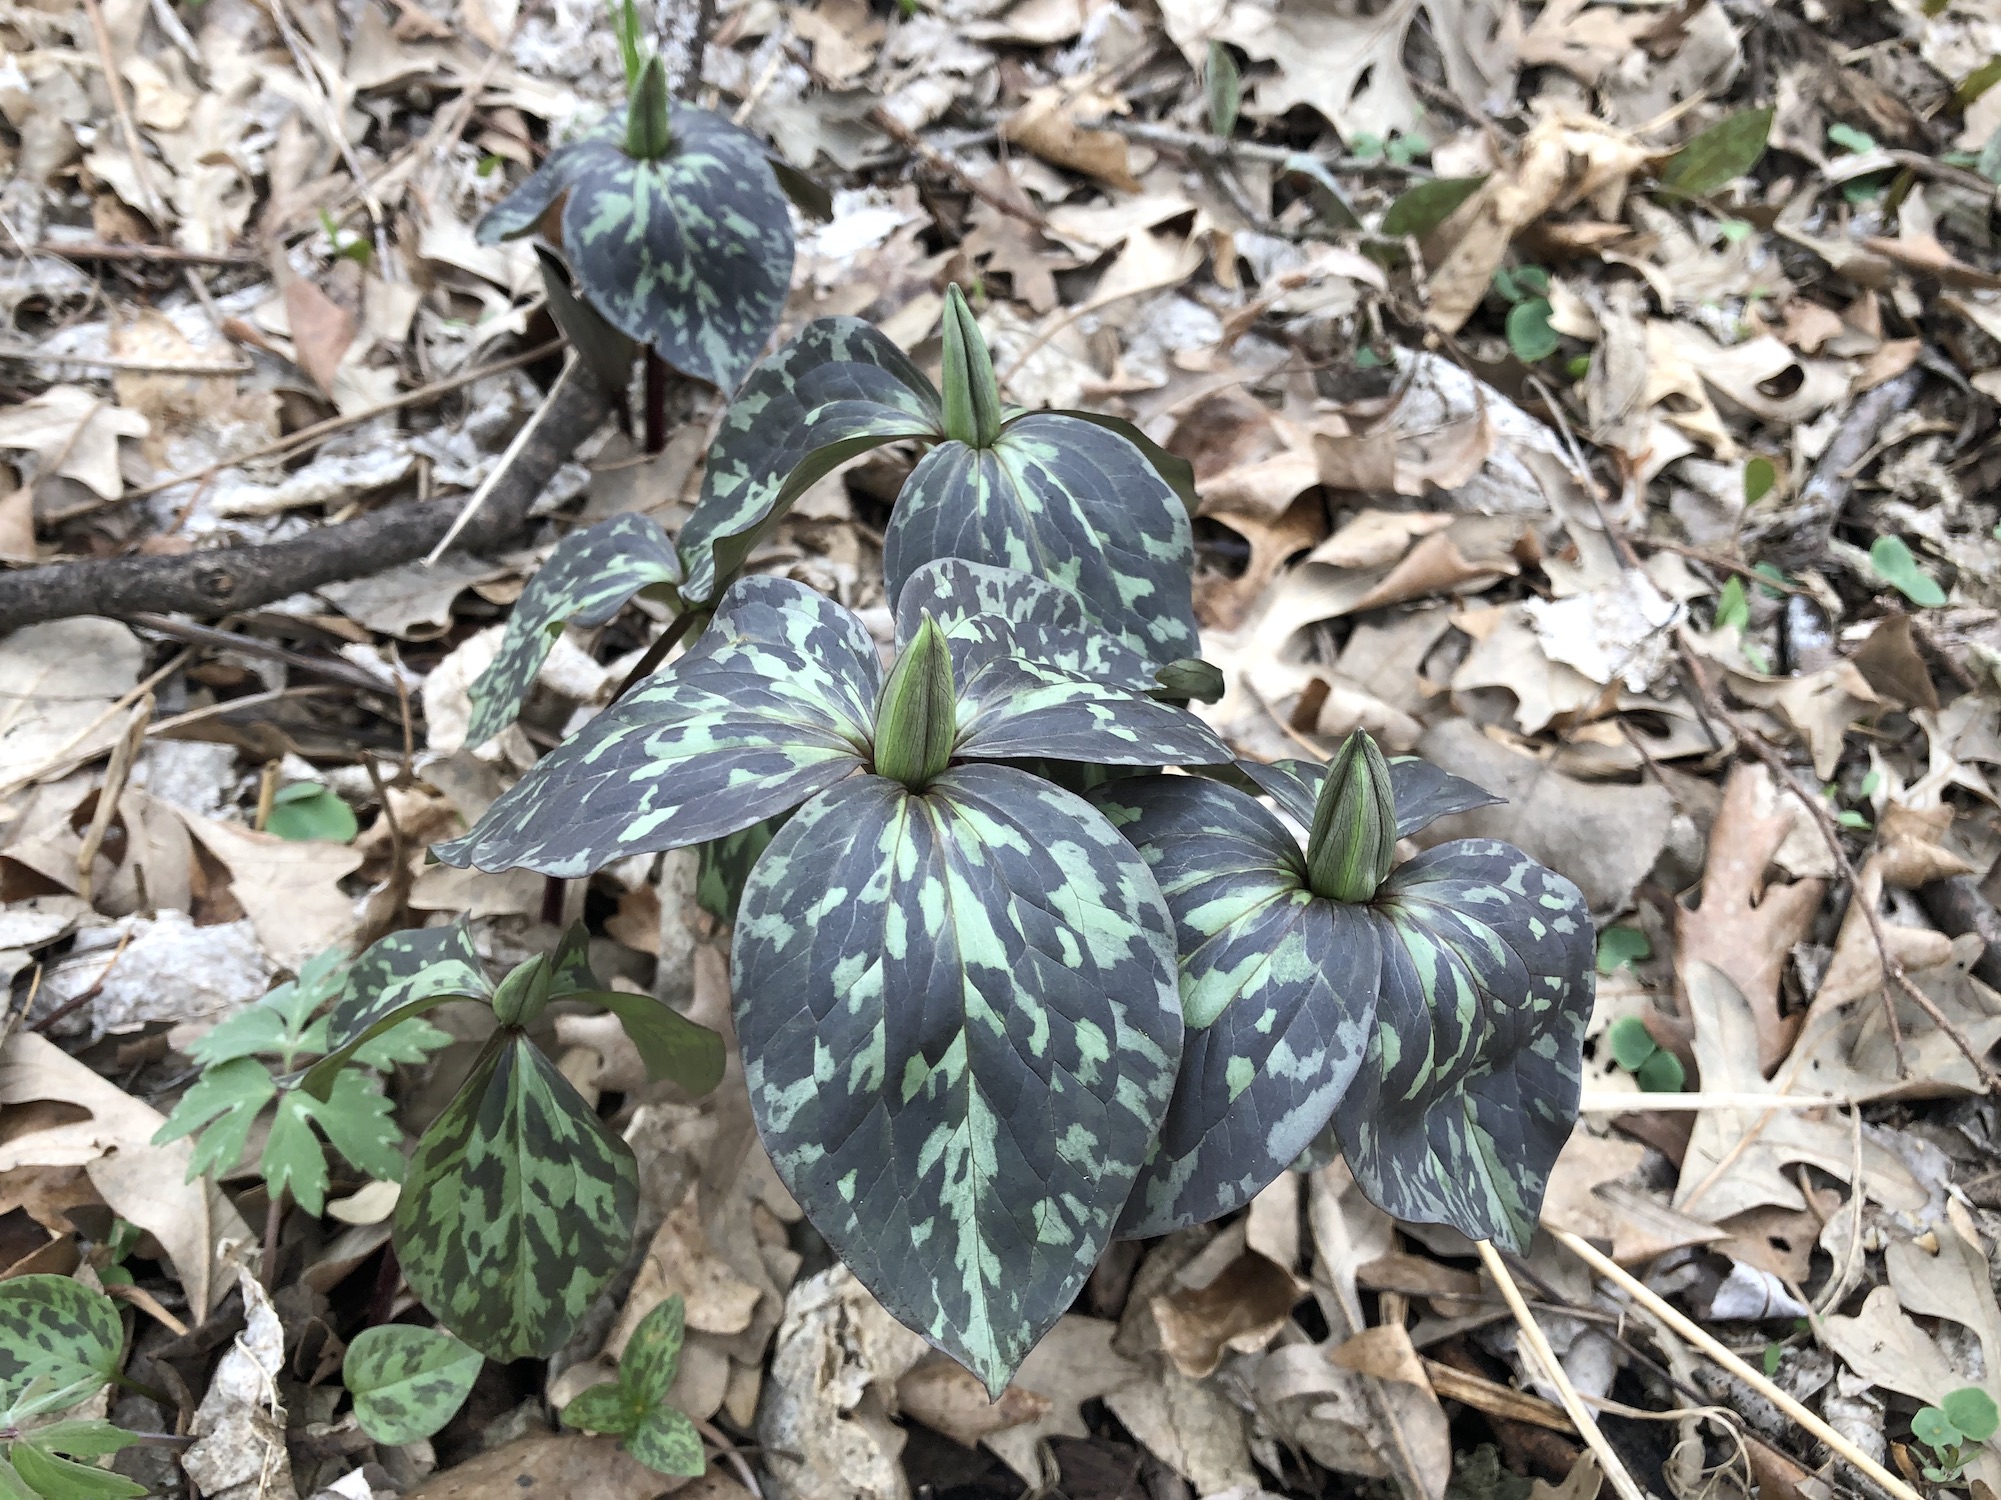 Trillium off of bike path between Marion Dunn and Duck Pond on April 18, 2019.